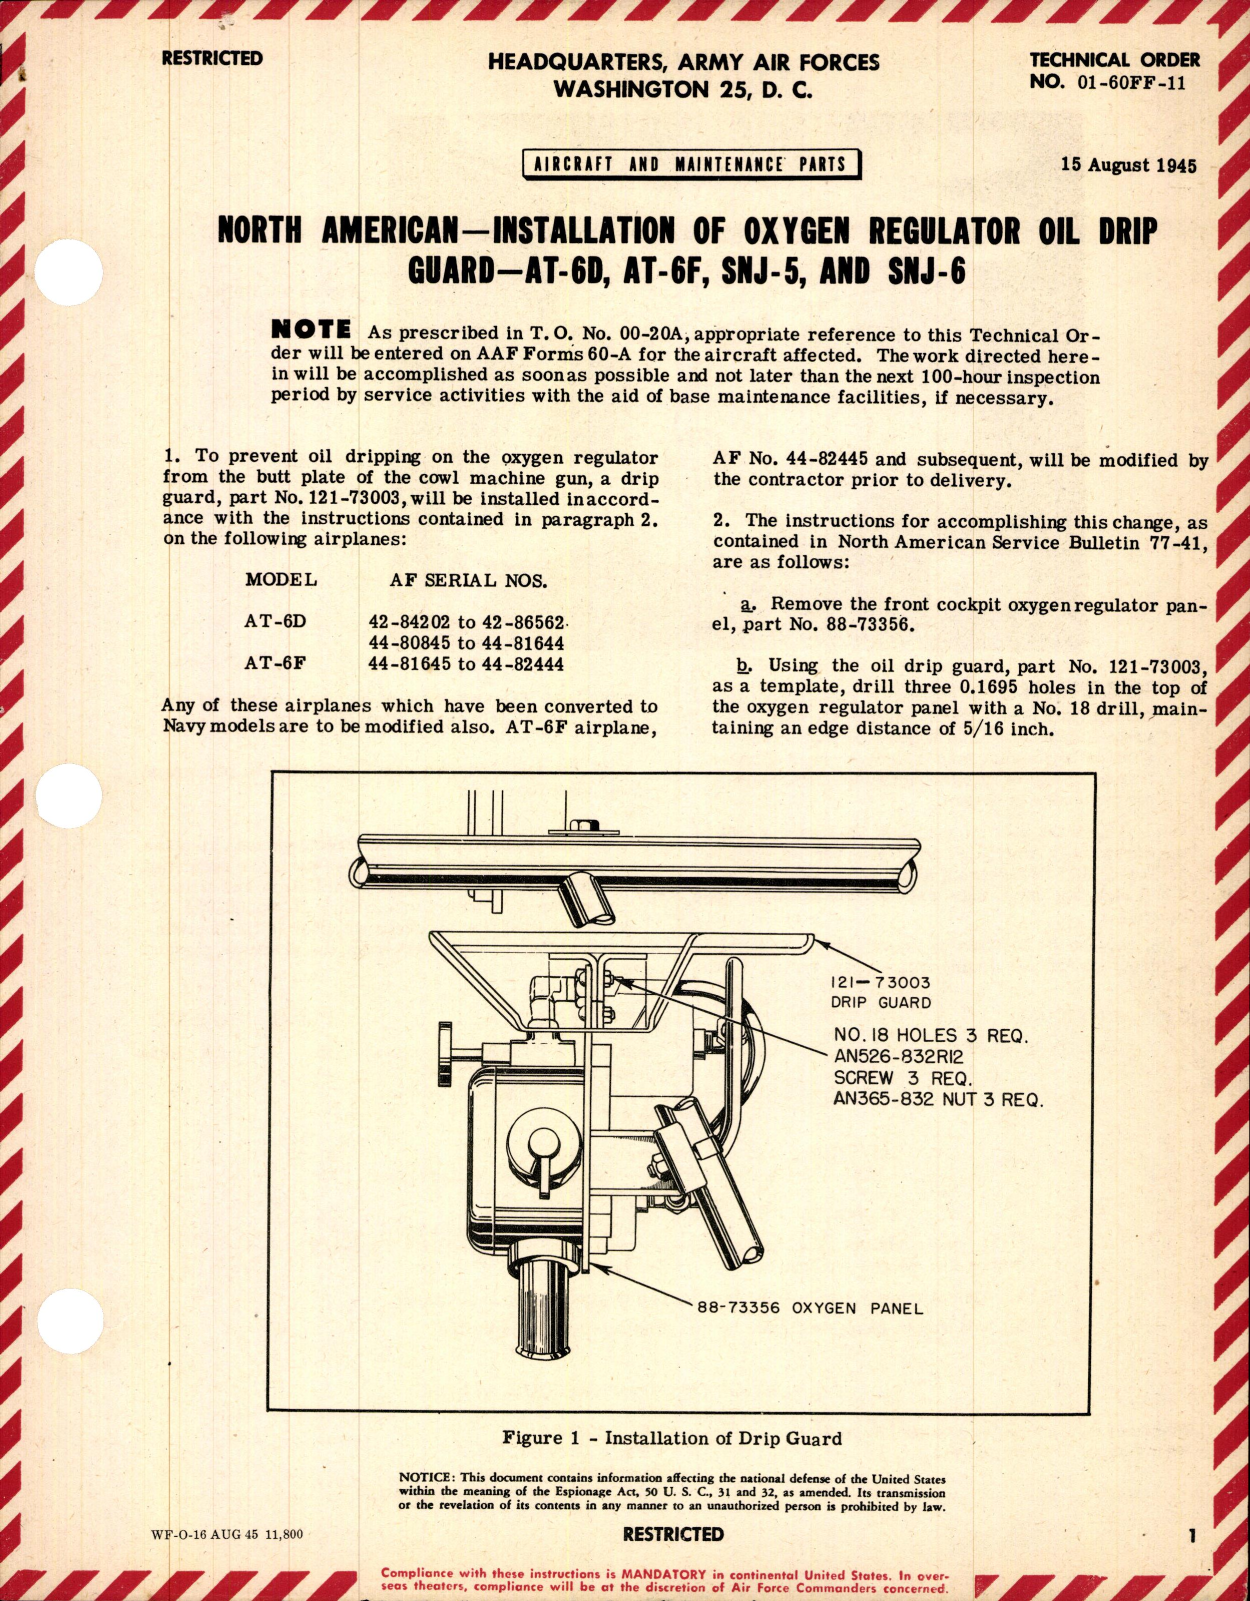 Sample page 1 from AirCorps Library document: Installation of Oxygen Regulator Oil Drip Guard for AT-6D, AT-6F, SNJ-5, and SNJ-6